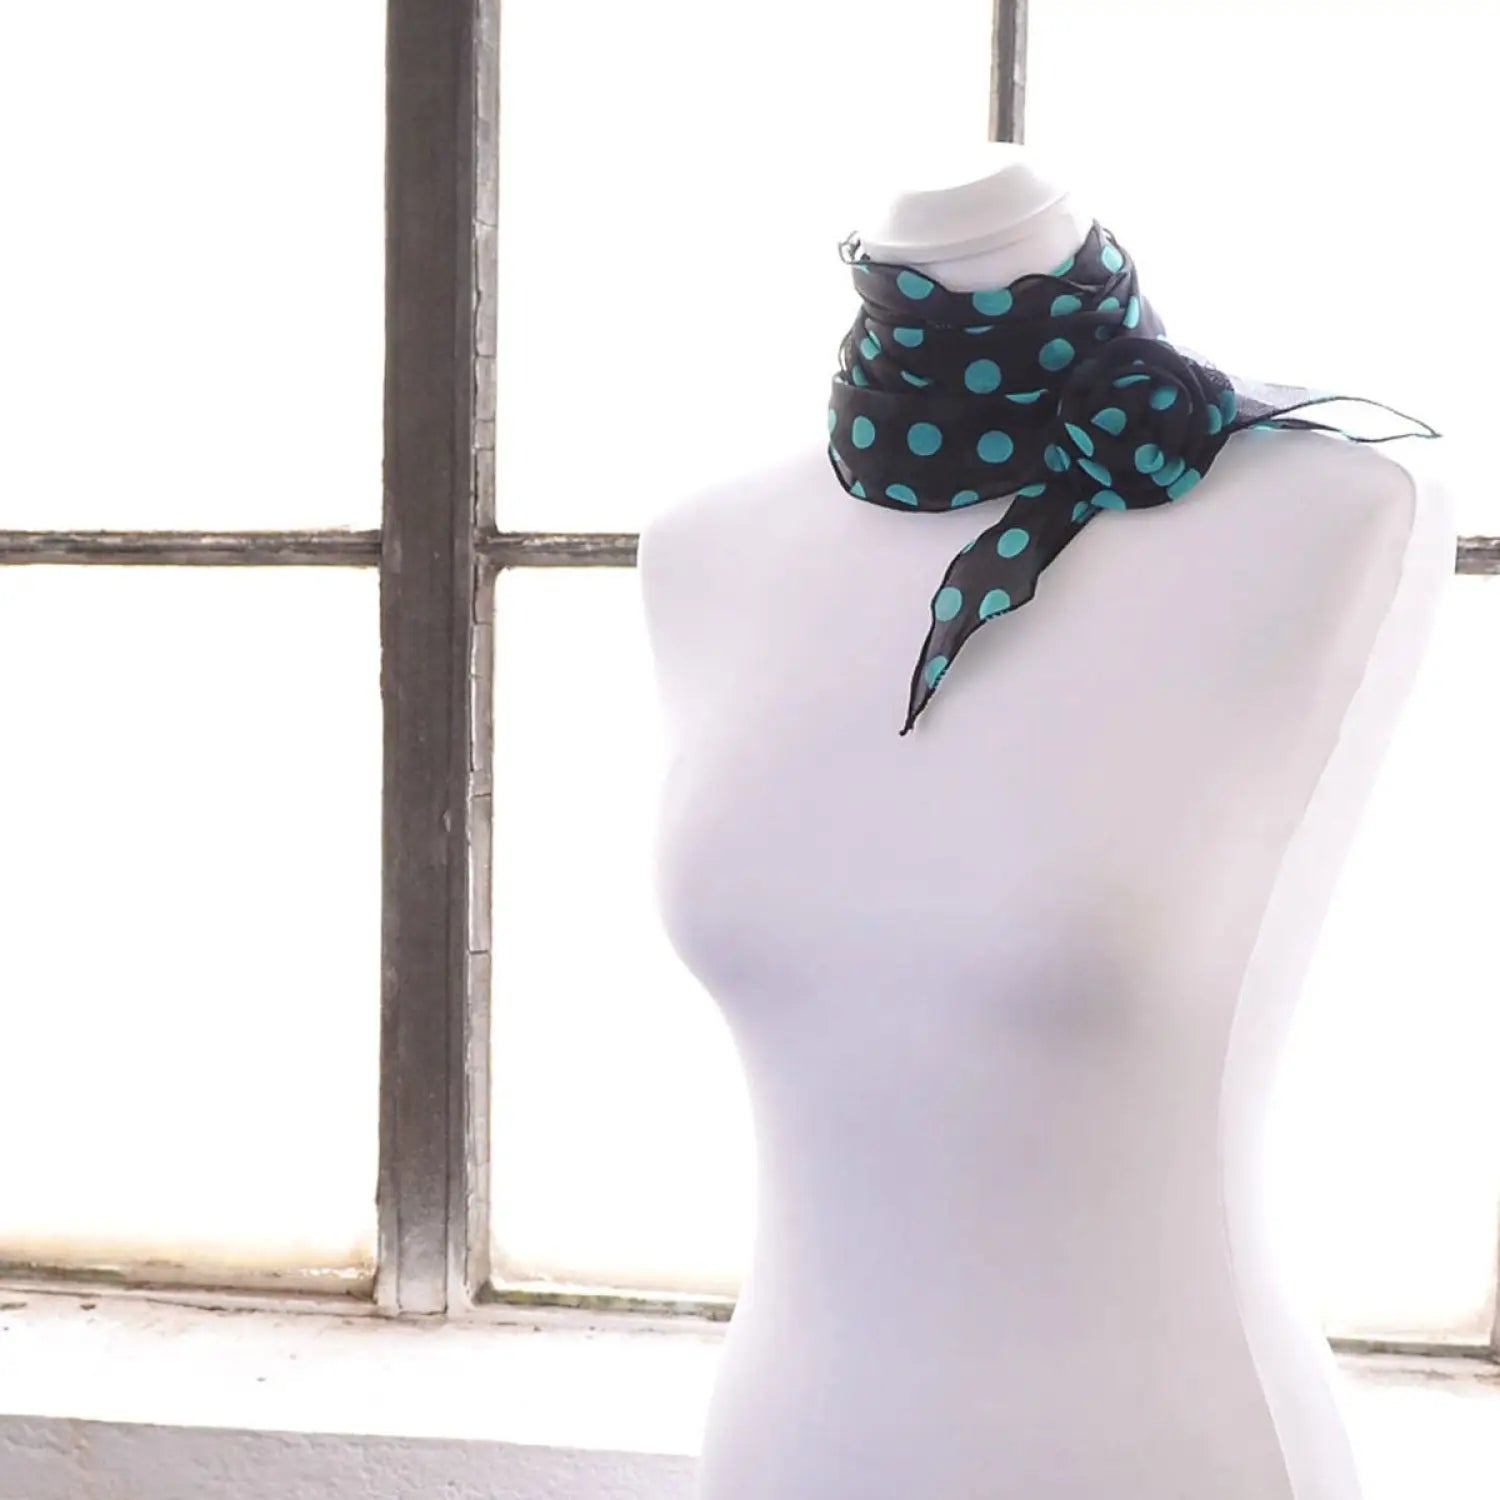 Polka dot chiffon mannequin wearing blue and green polka print scarf and flower hair clips from set